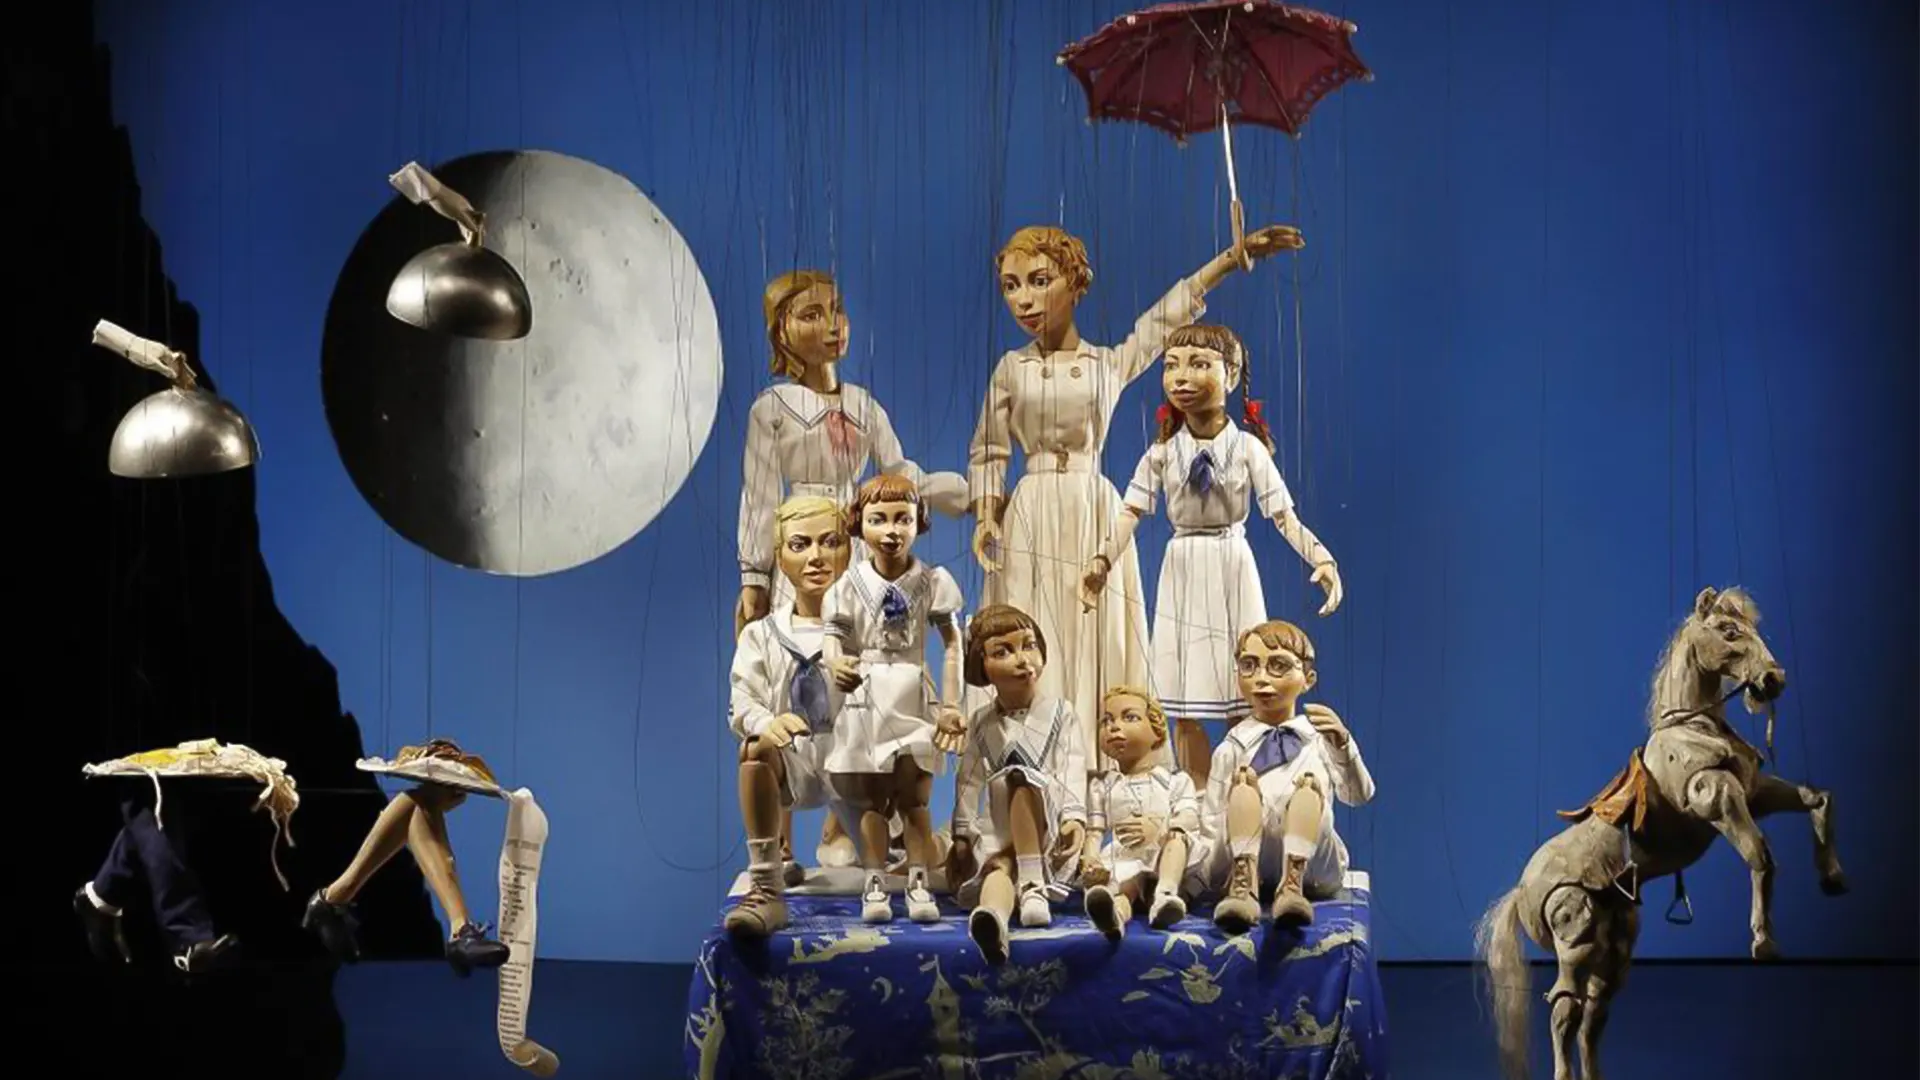 Puppetry Highlights Show at the Marionettentheater